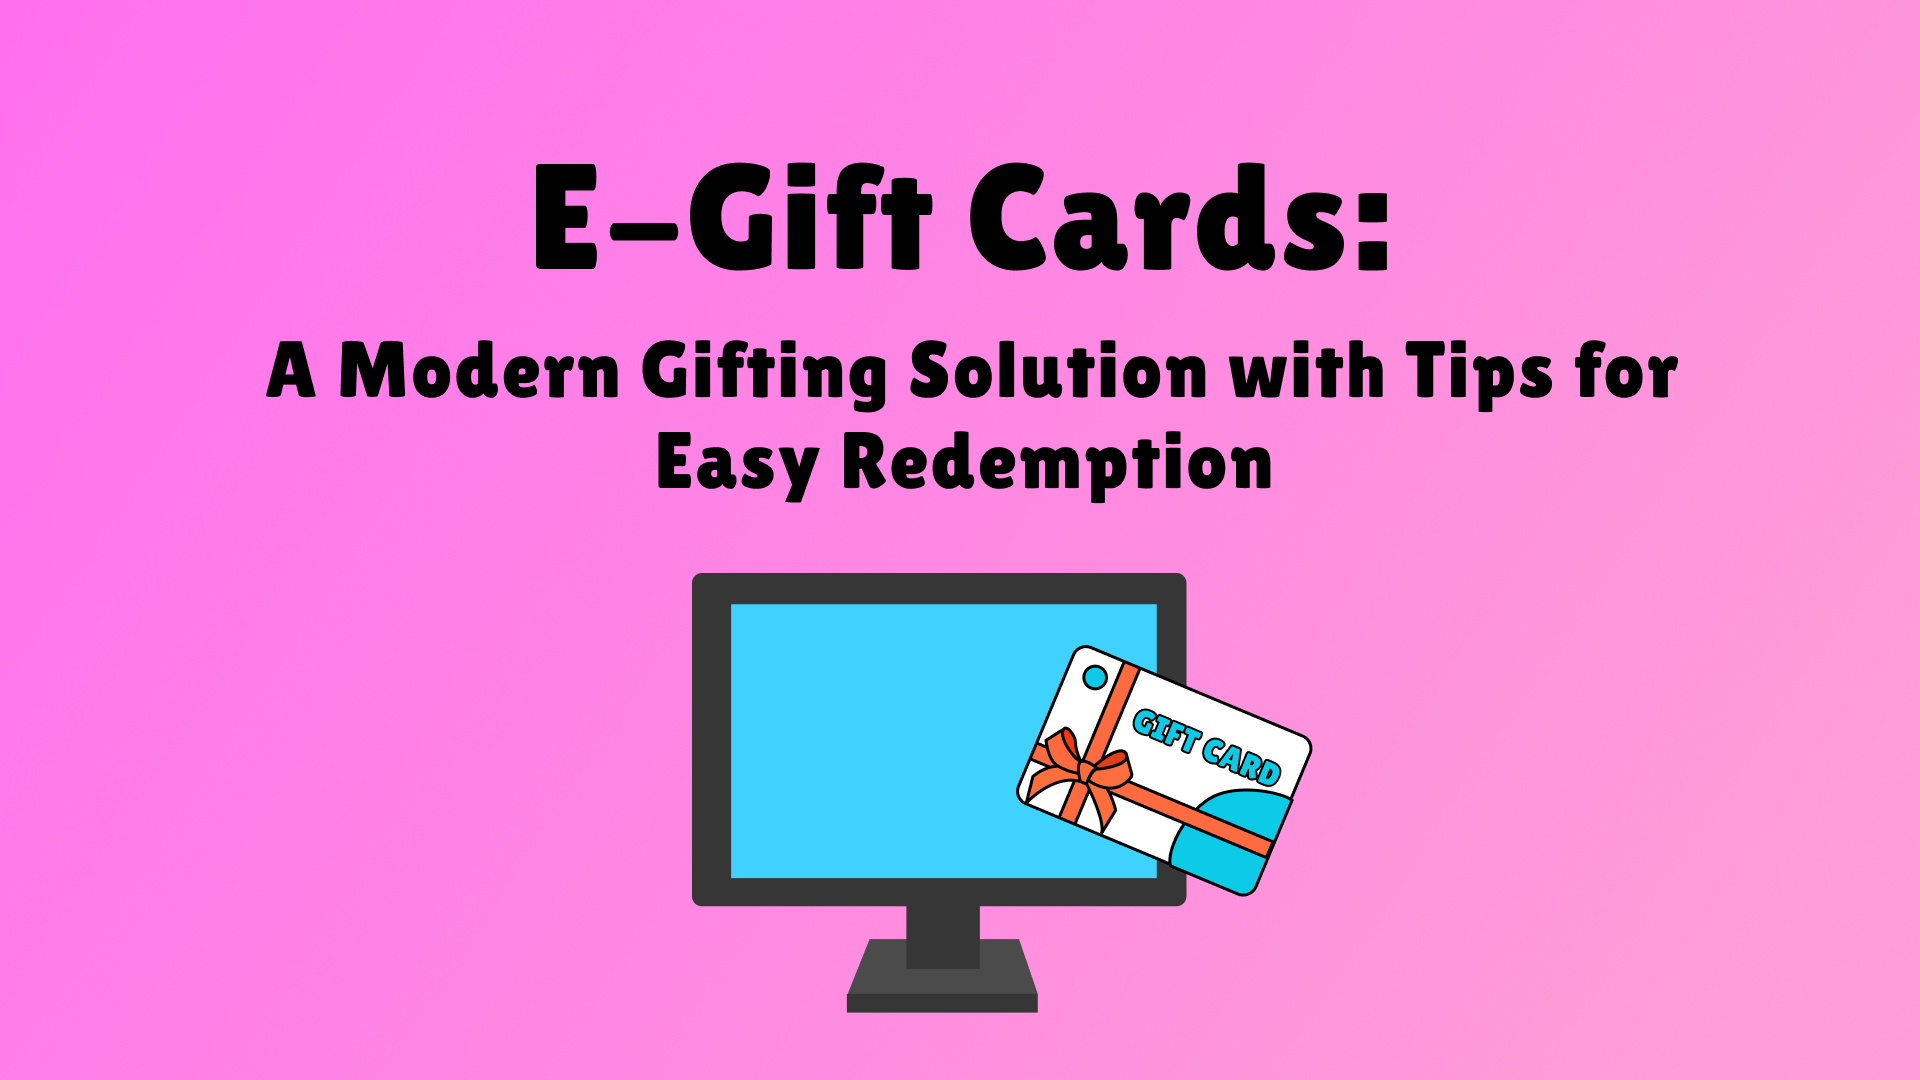 &#8220;E-Gift Cards: A Modern Gifting Solution with Tips for Easy Redemption&#8221;